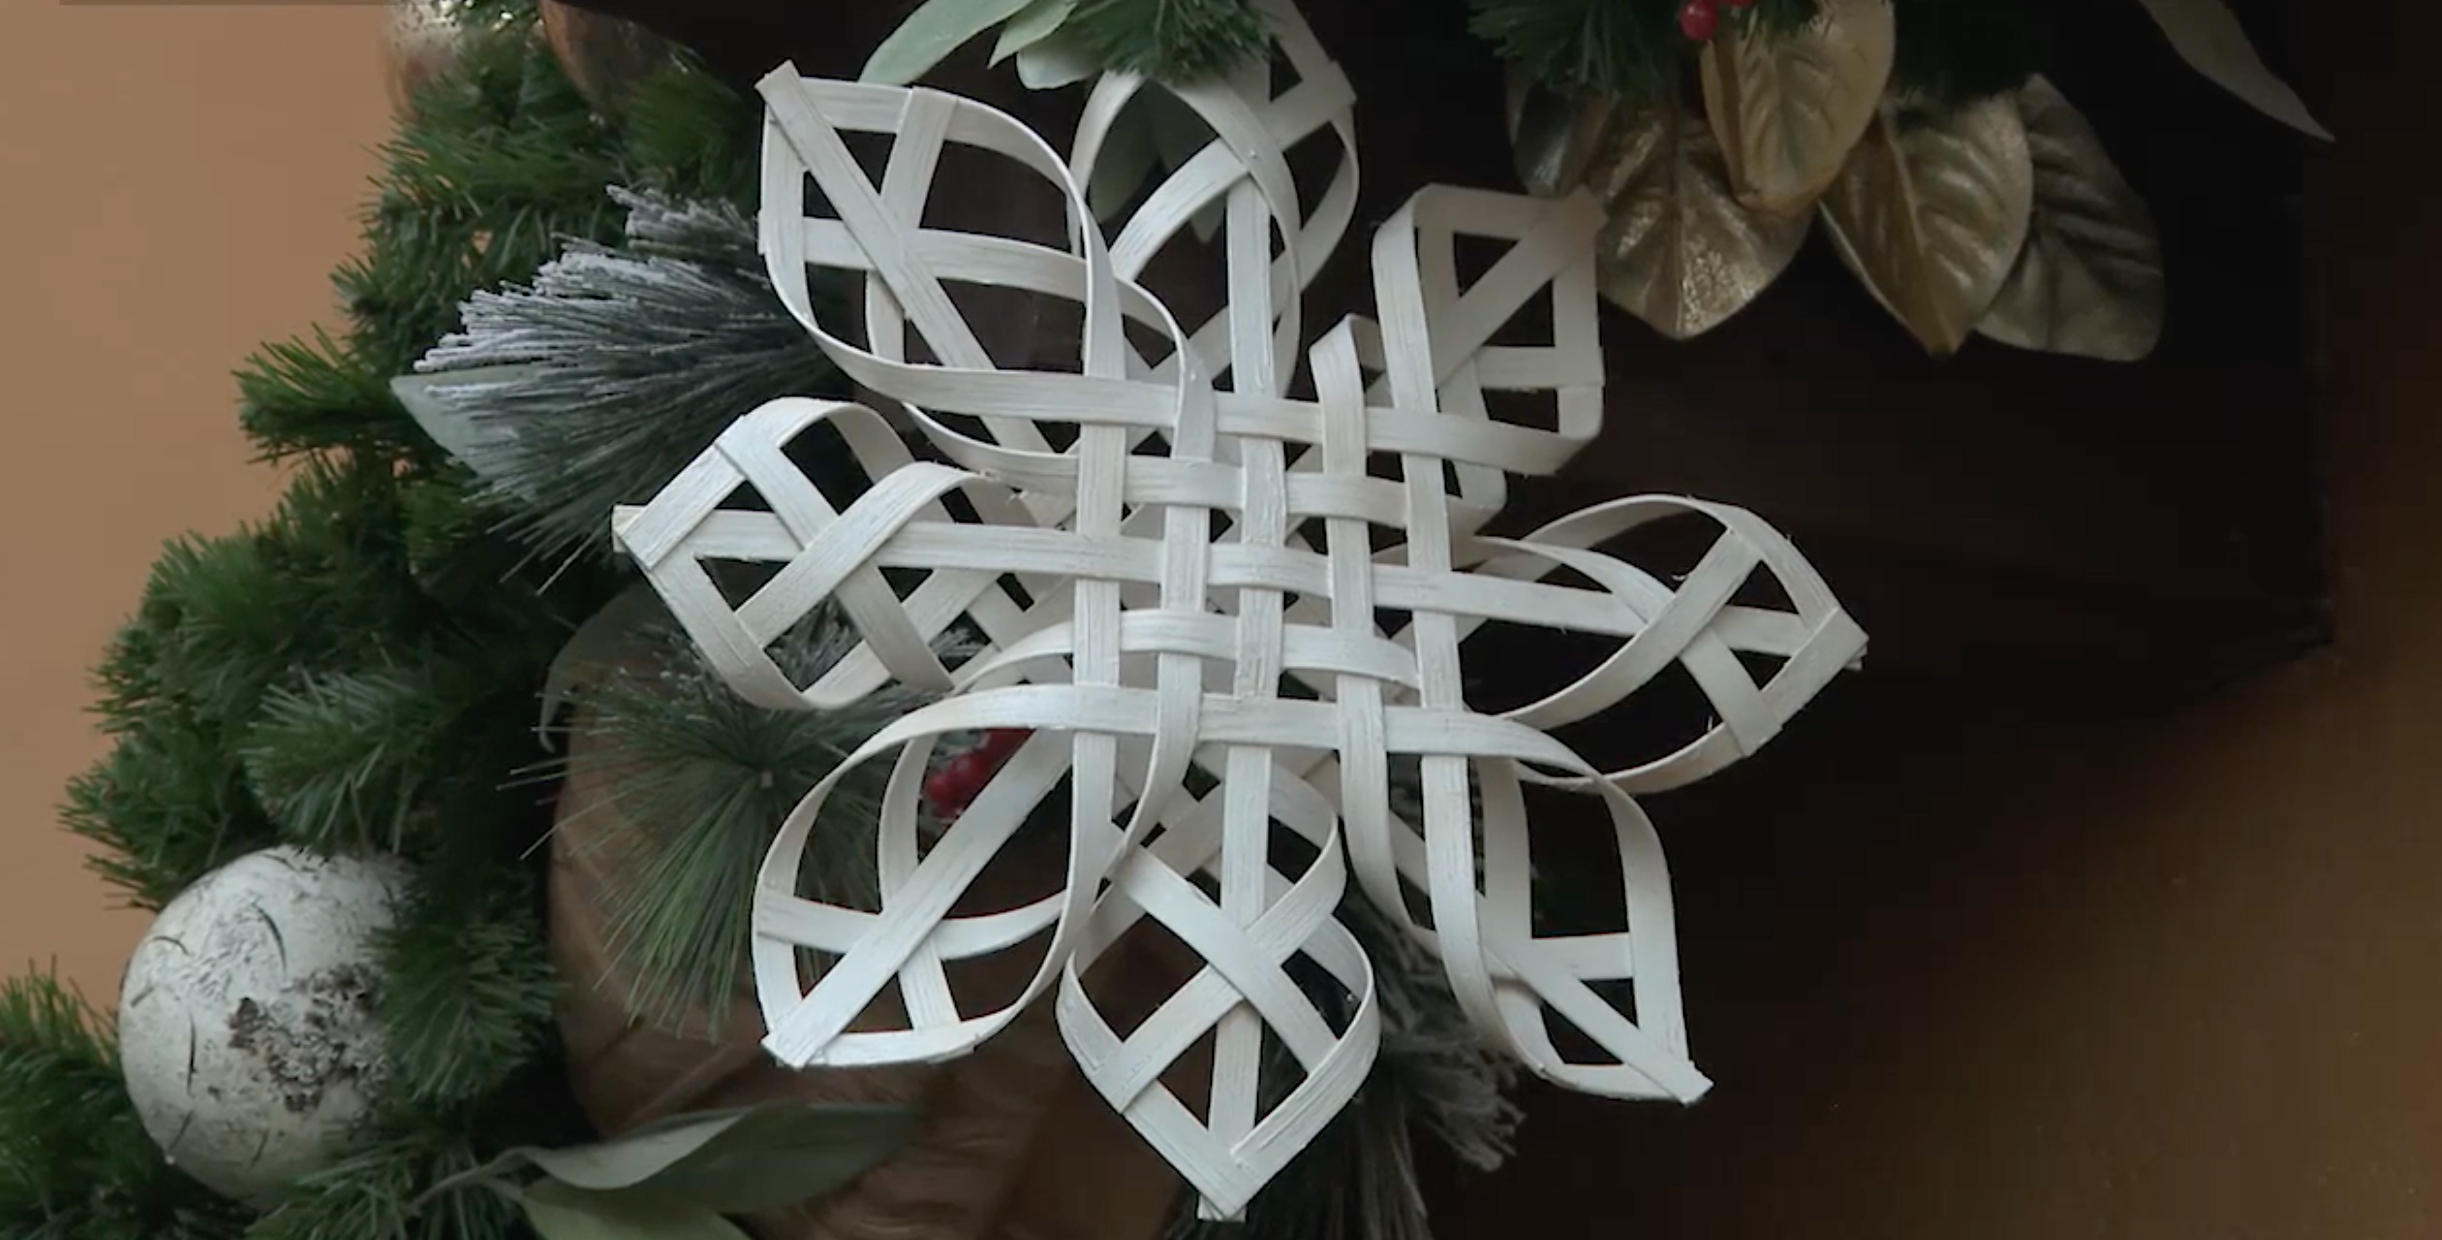 PHOTO: The artisans used a similar process they used to weave seats on homemade chairs to create the snowflakes.